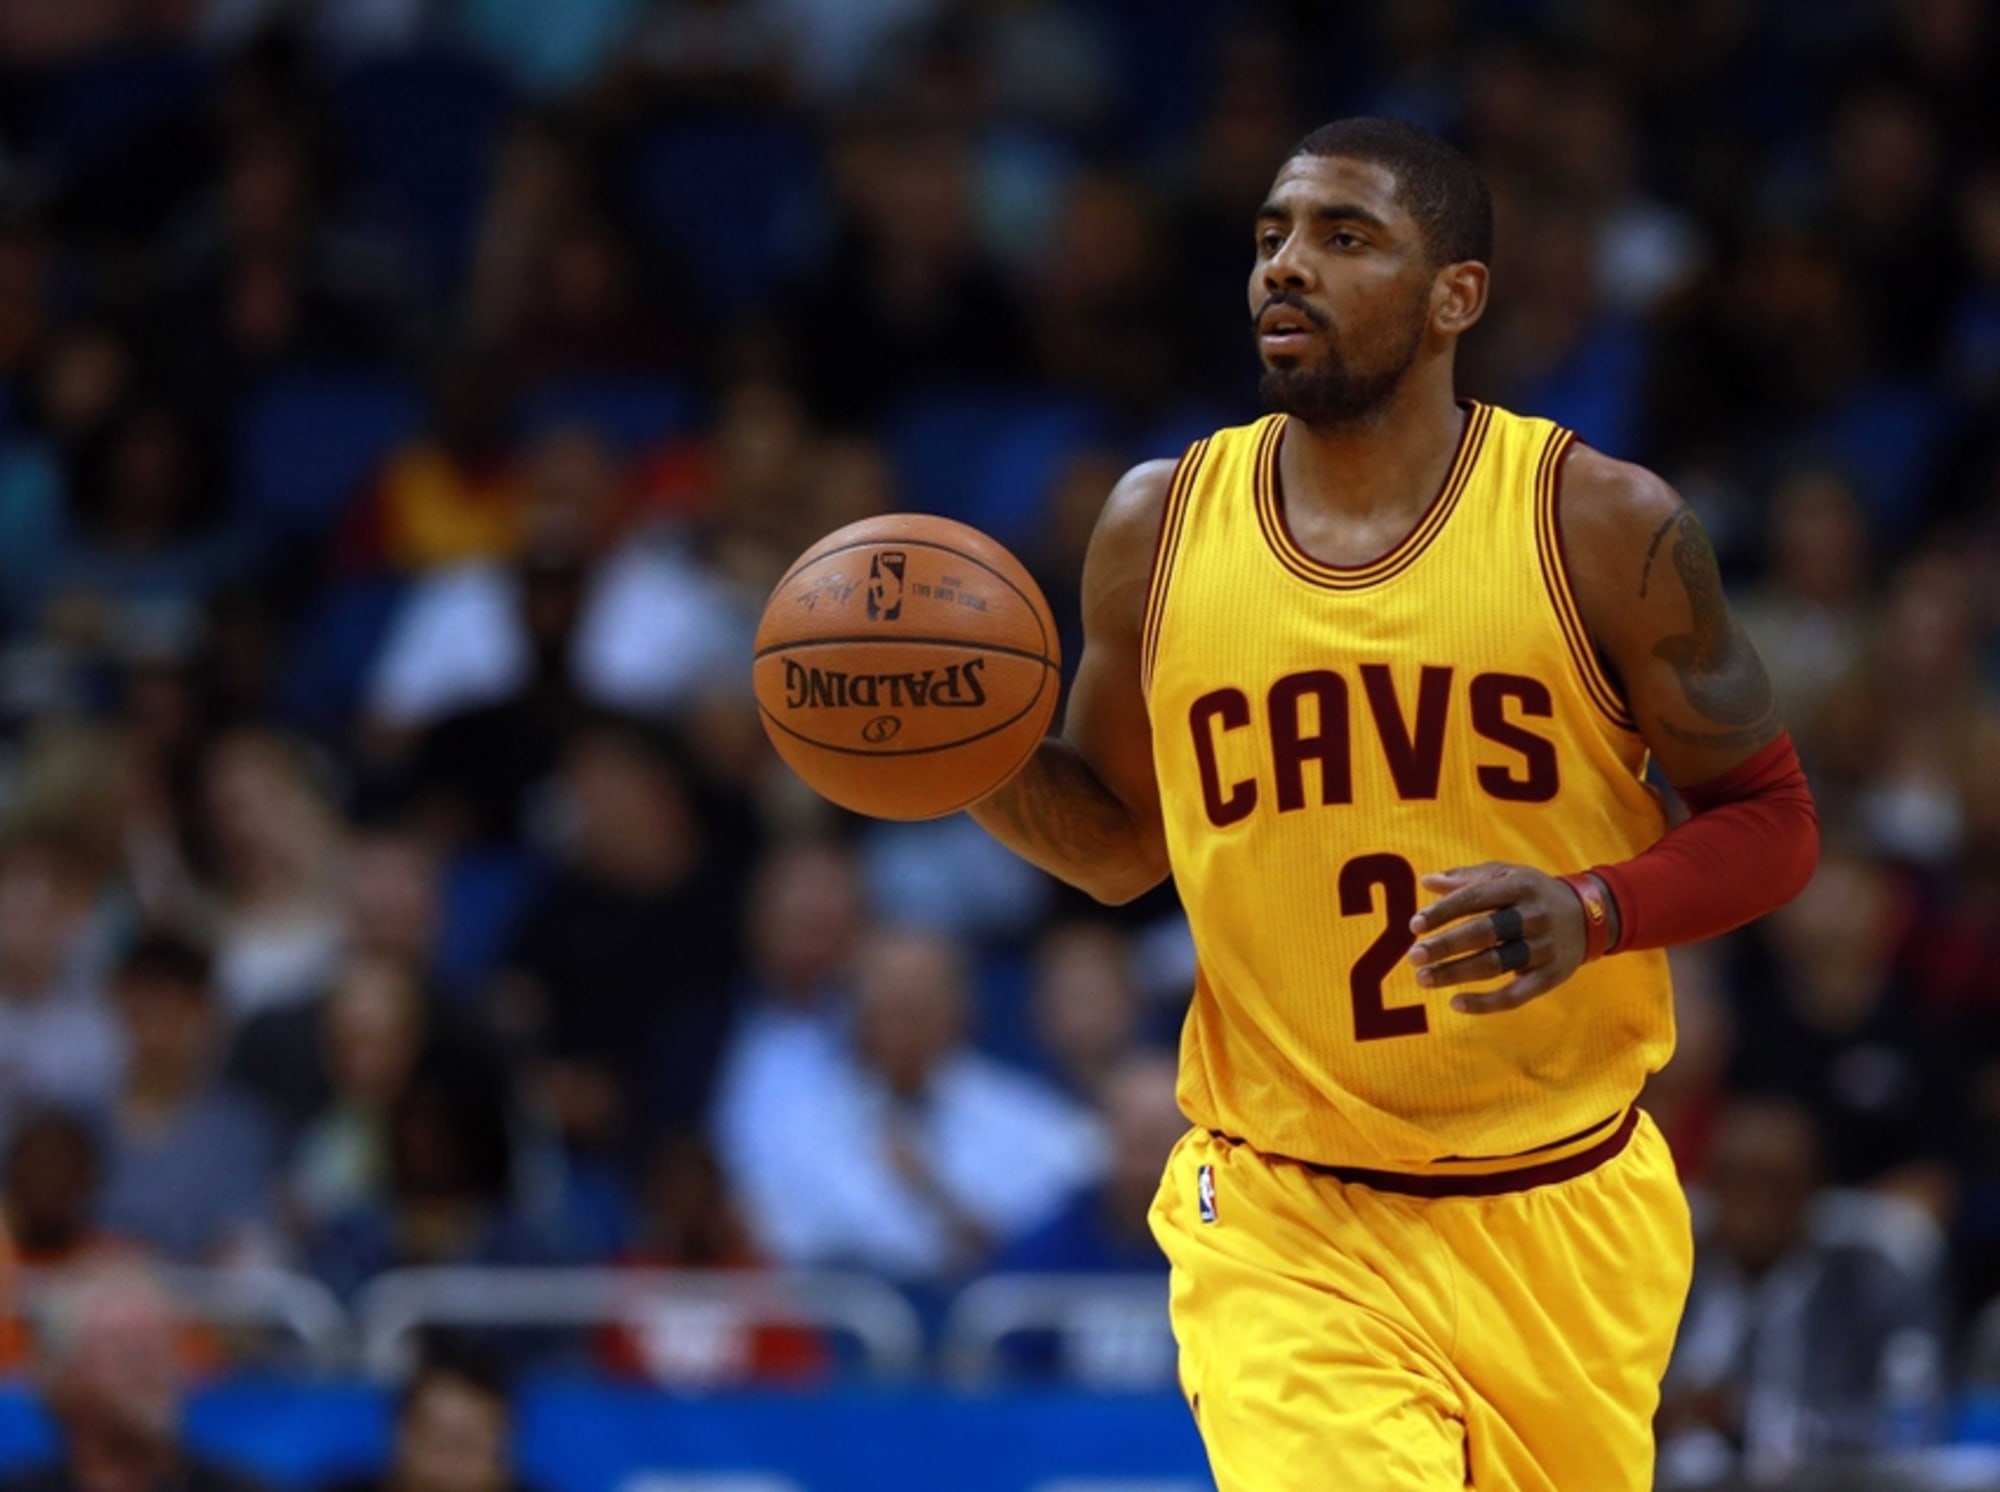 kyrie irving 2016